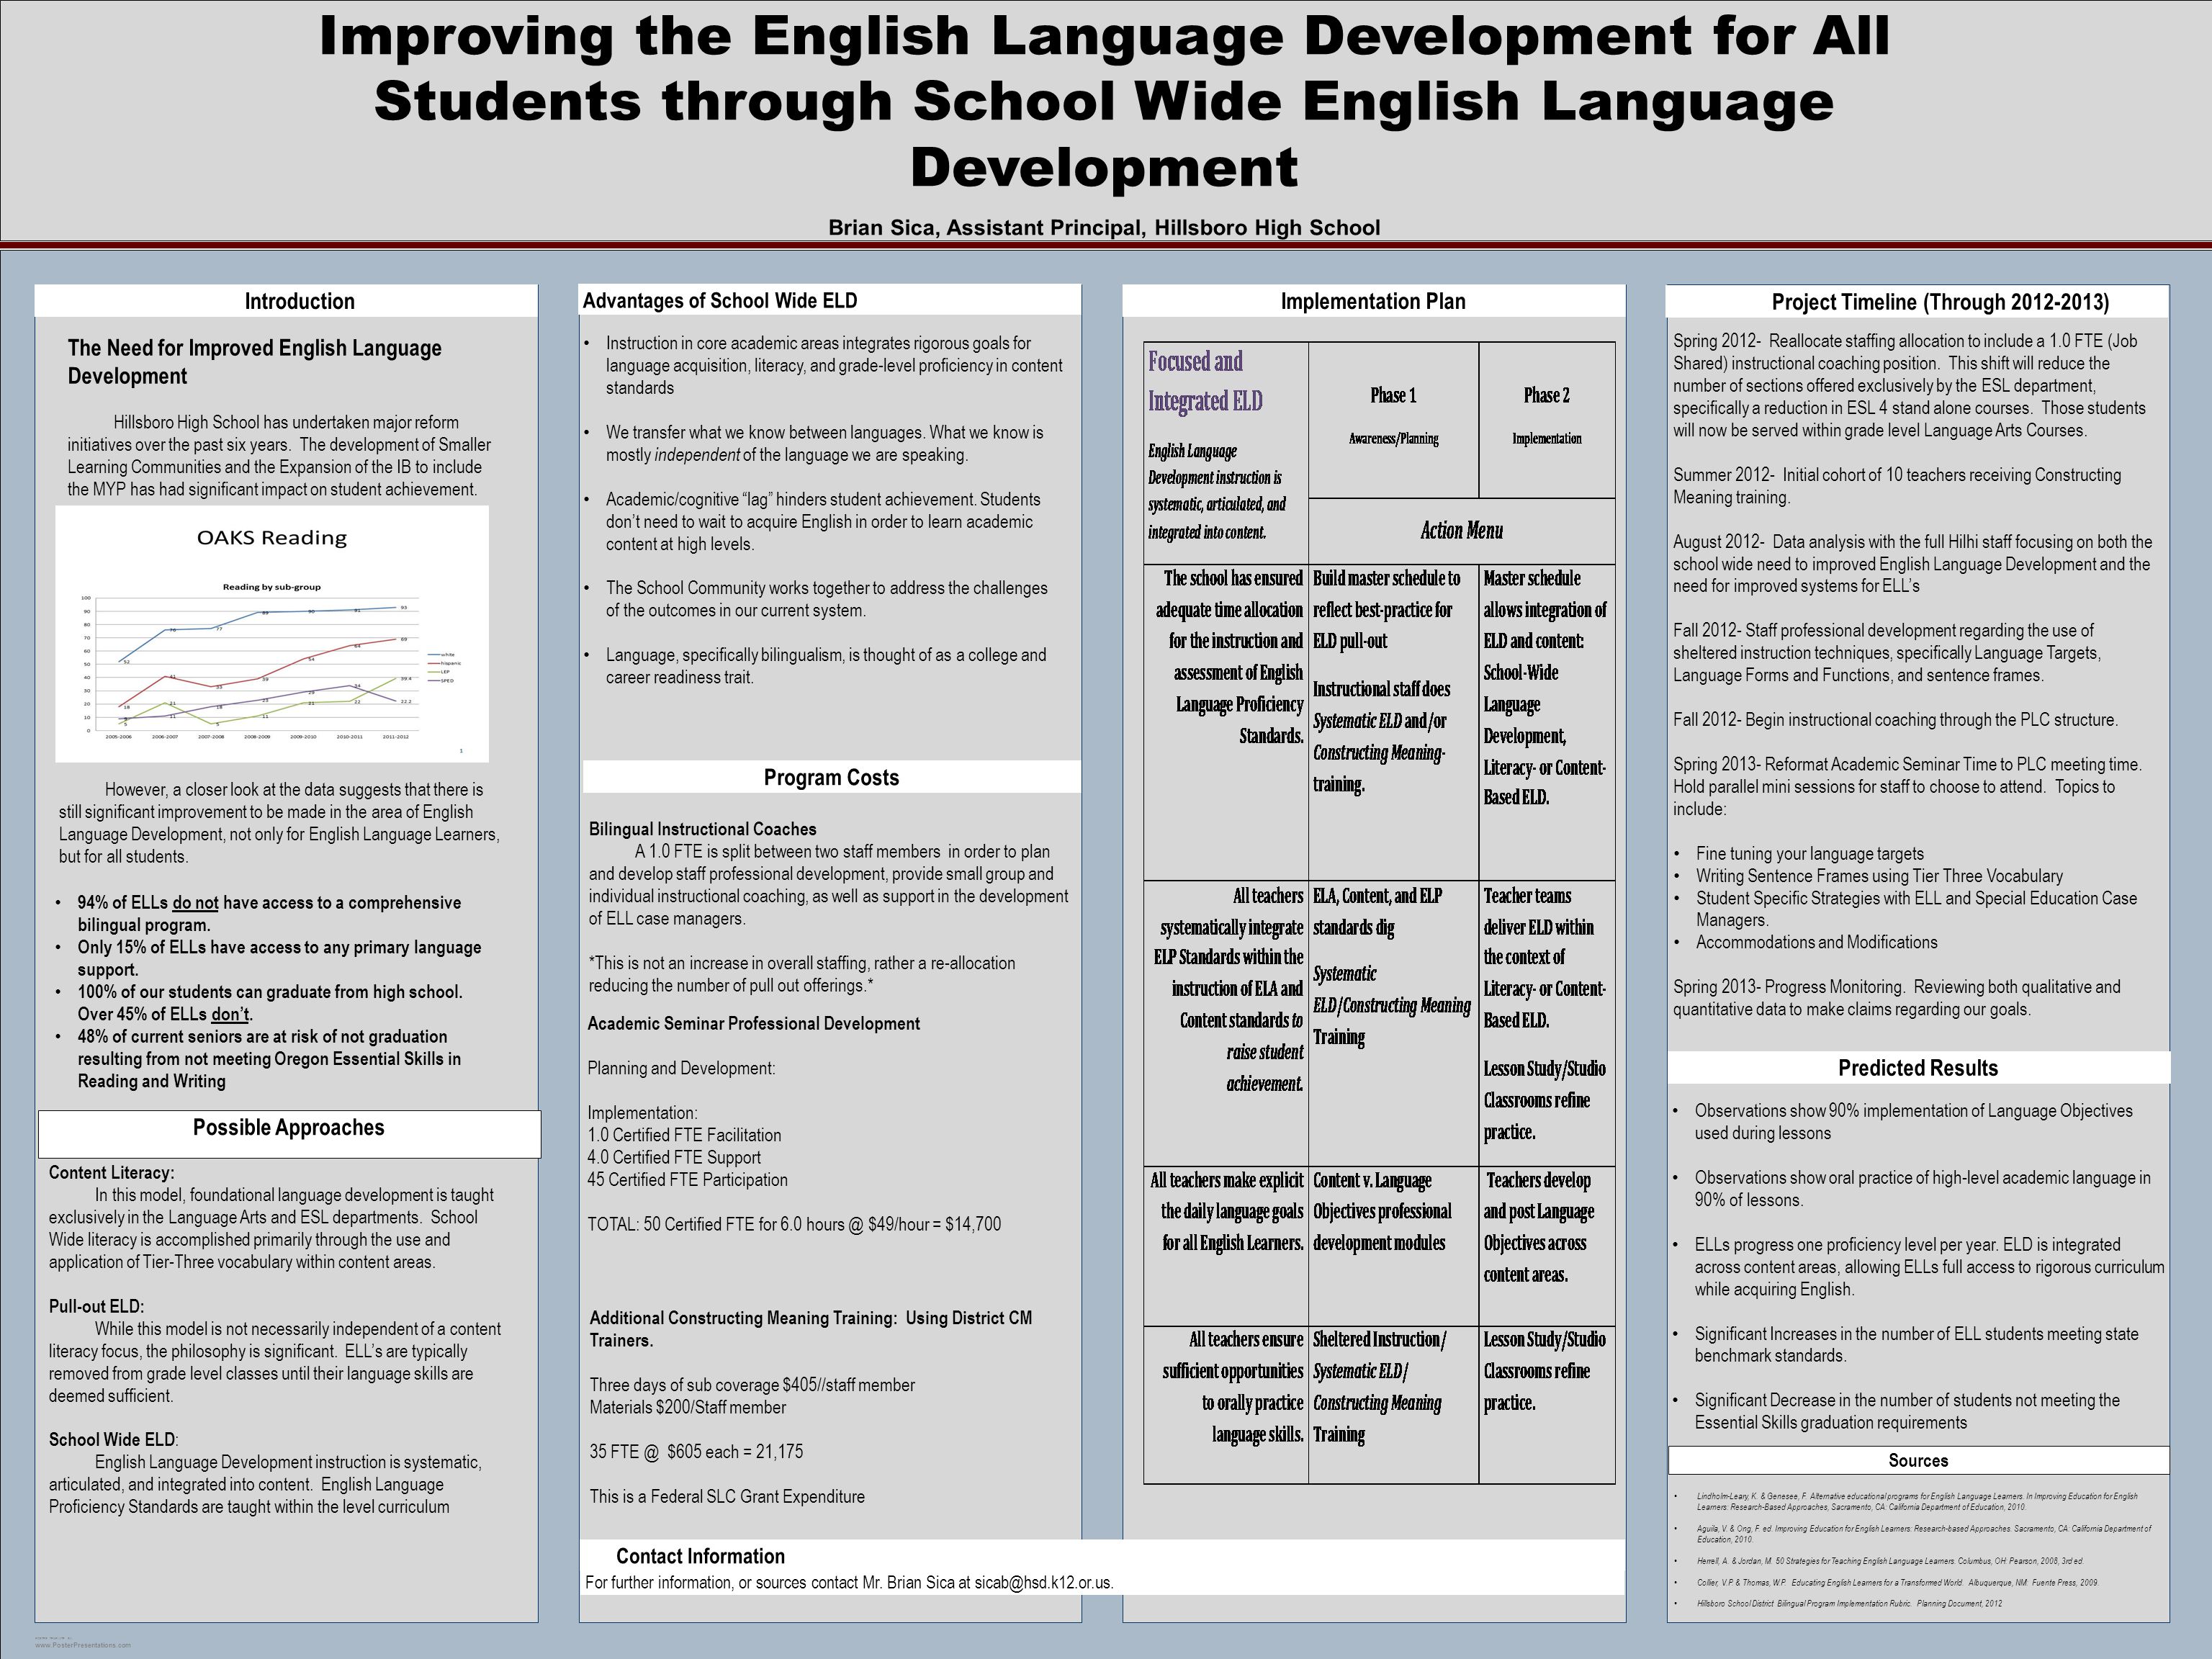 POSTER TEMPLATE BY:   Improving the English Language Development for All Students through School Wide English Language Development Brian Sica, Assistant Principal, Hillsboro High School Implementation Plan Introduction Advantages of School Wide ELD Project Timeline (Through ) For further information, or sources contact Mr.